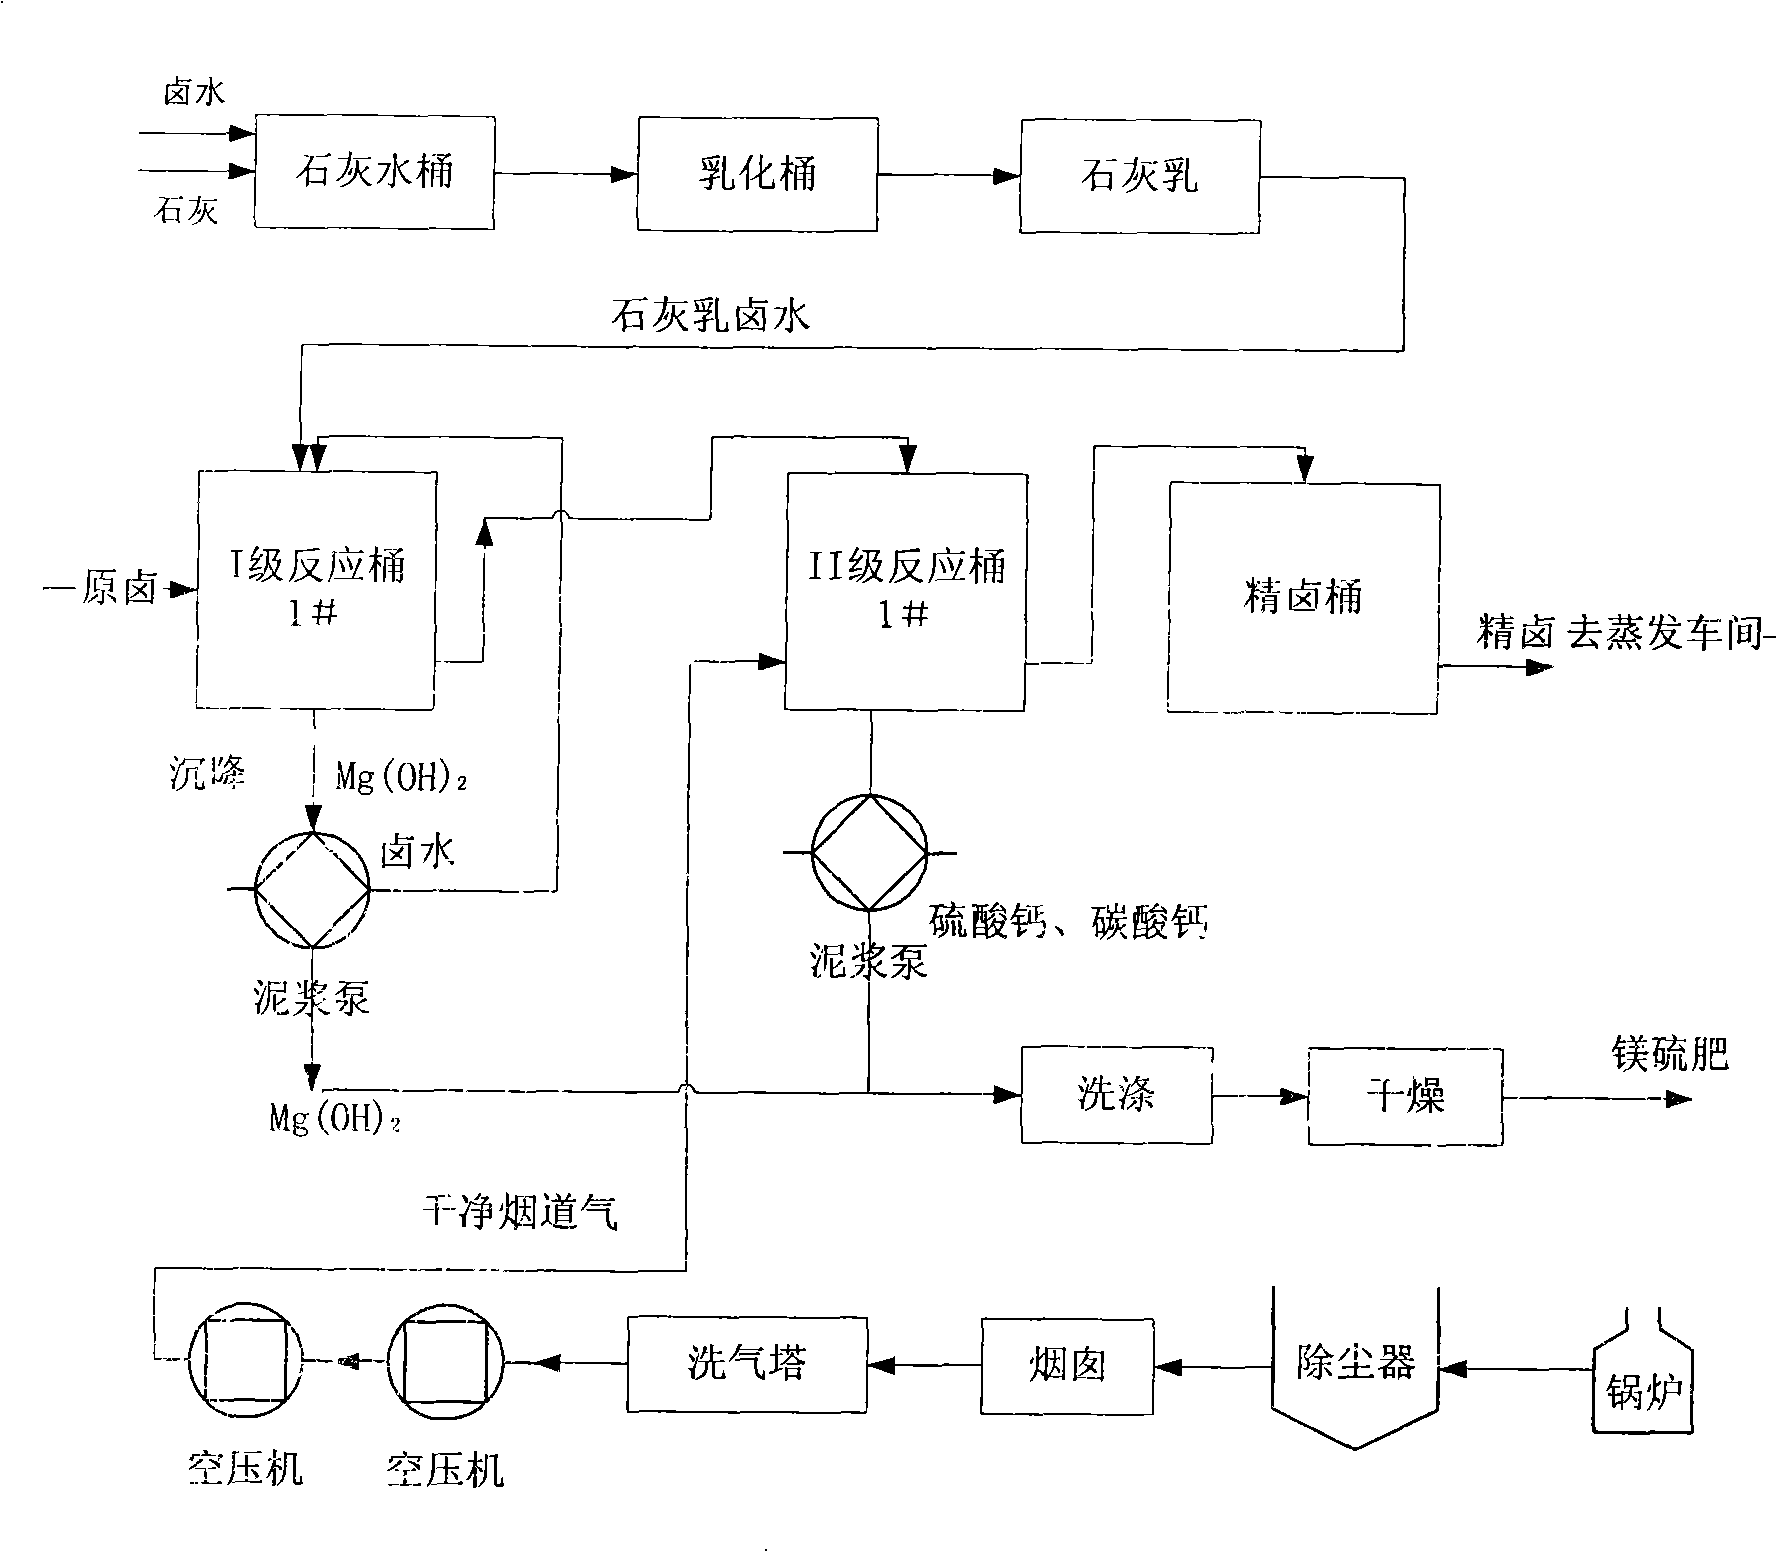 Technological process for purifying bittern